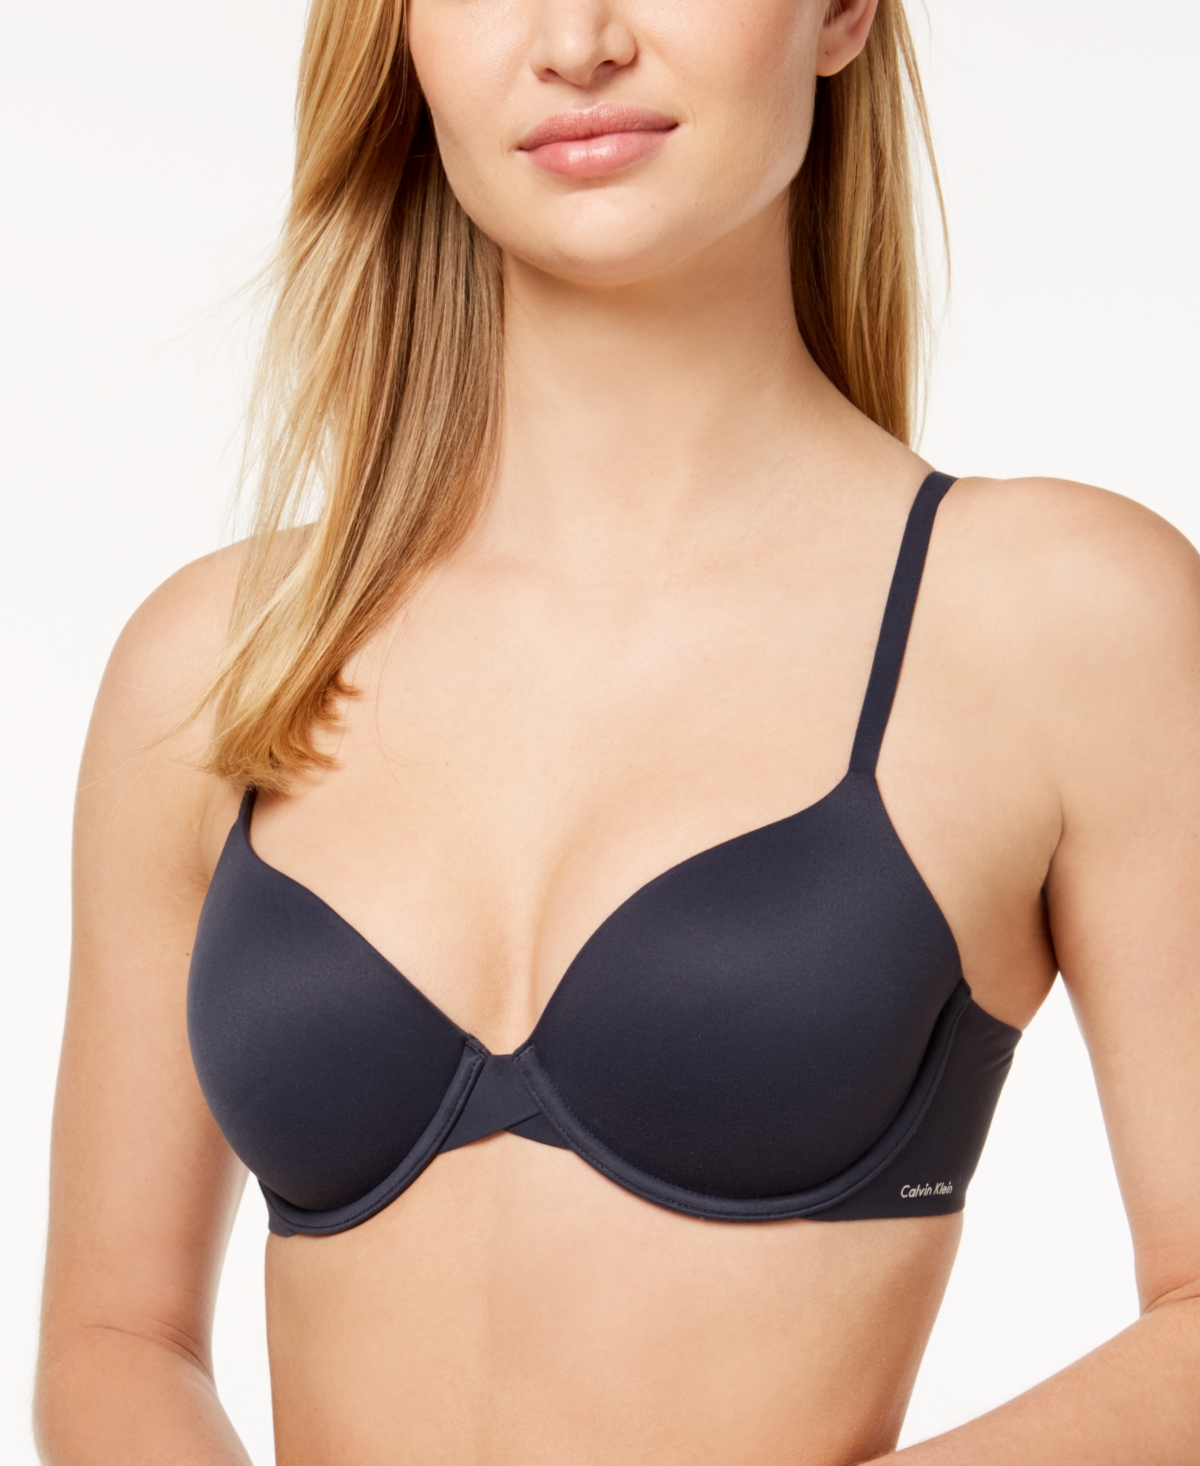 UPC 011531137592 product image for Calvin Klein Perfectly Fit Full Coverage T-Shirt Bra F3837 | upcitemdb.com